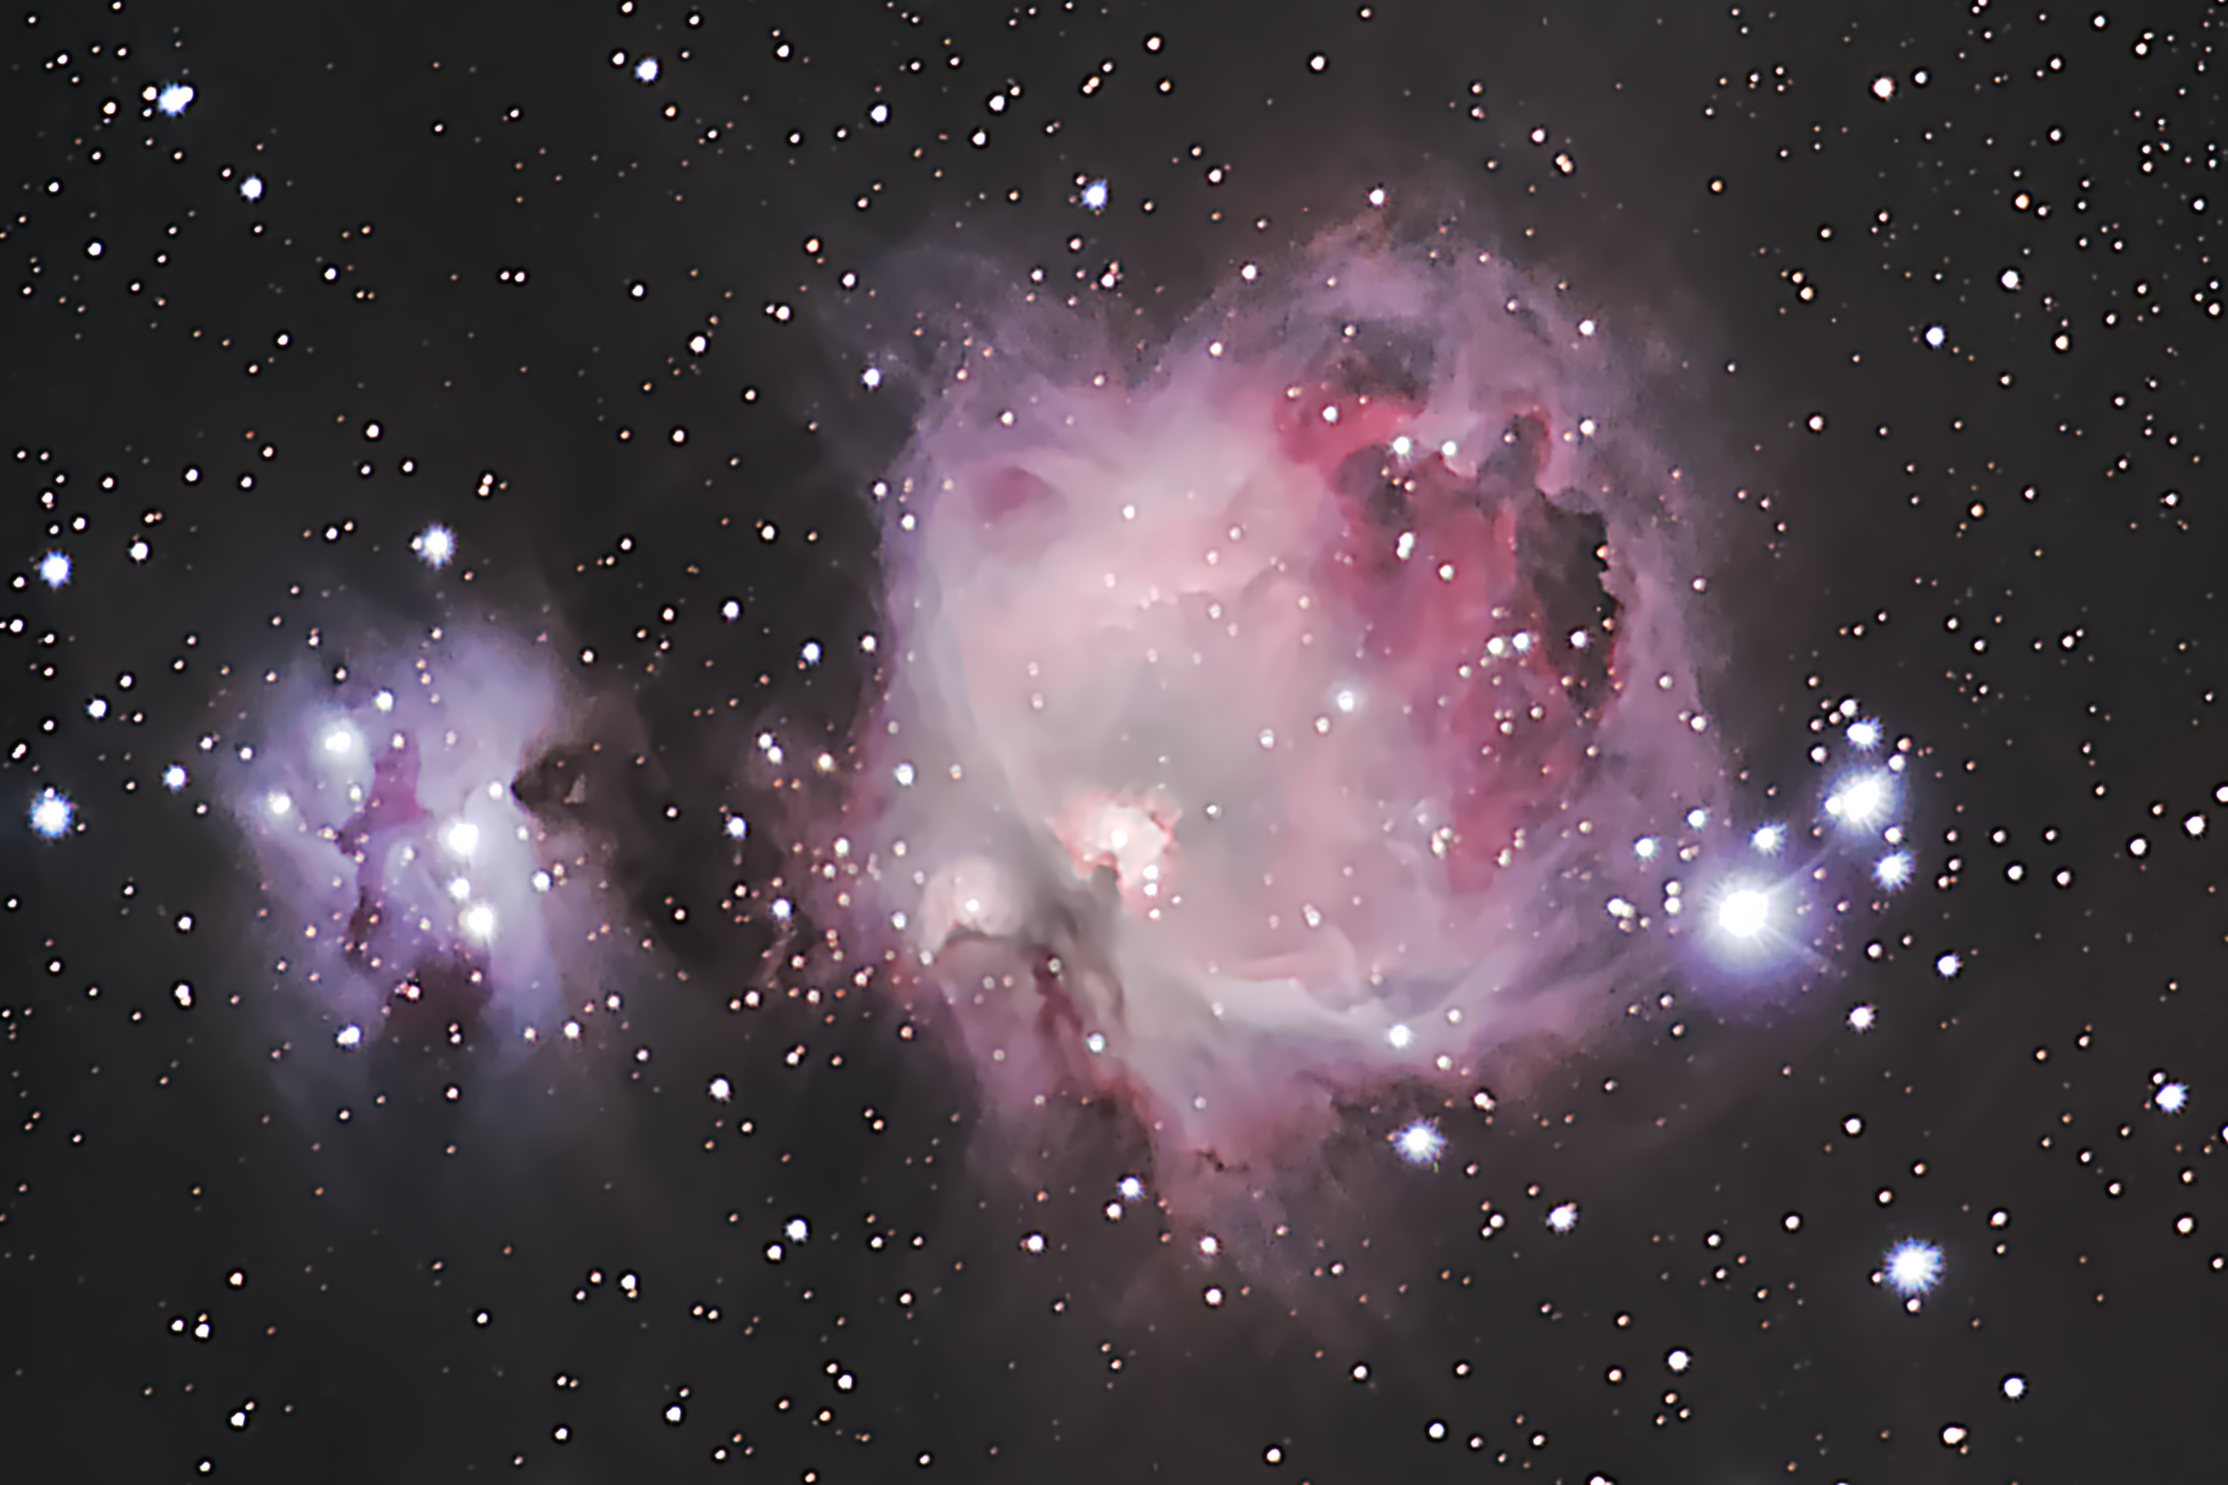 M42 – The Great Orion Nebula